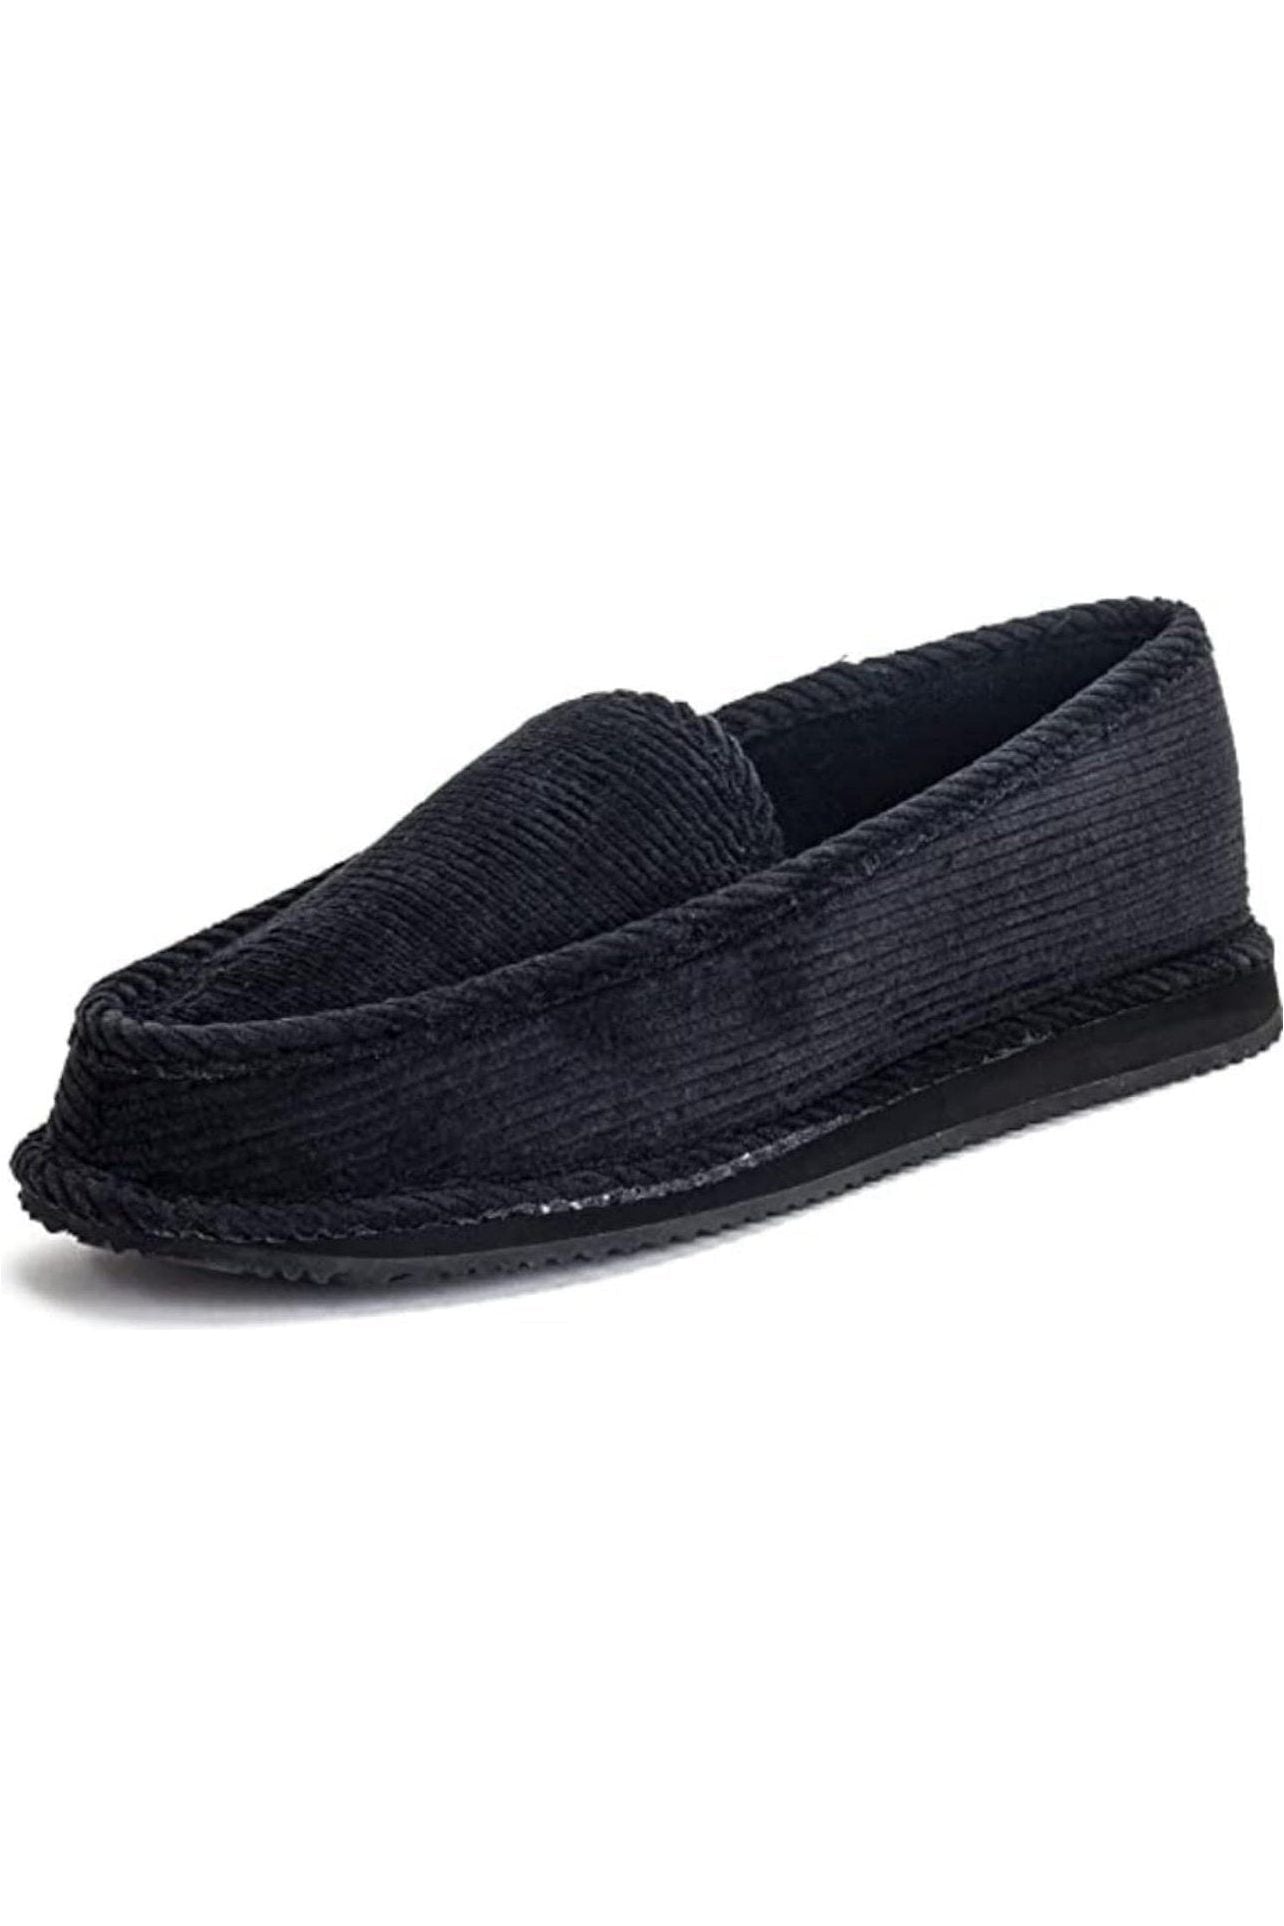 HOUSE SLIPPERS (SOLID)